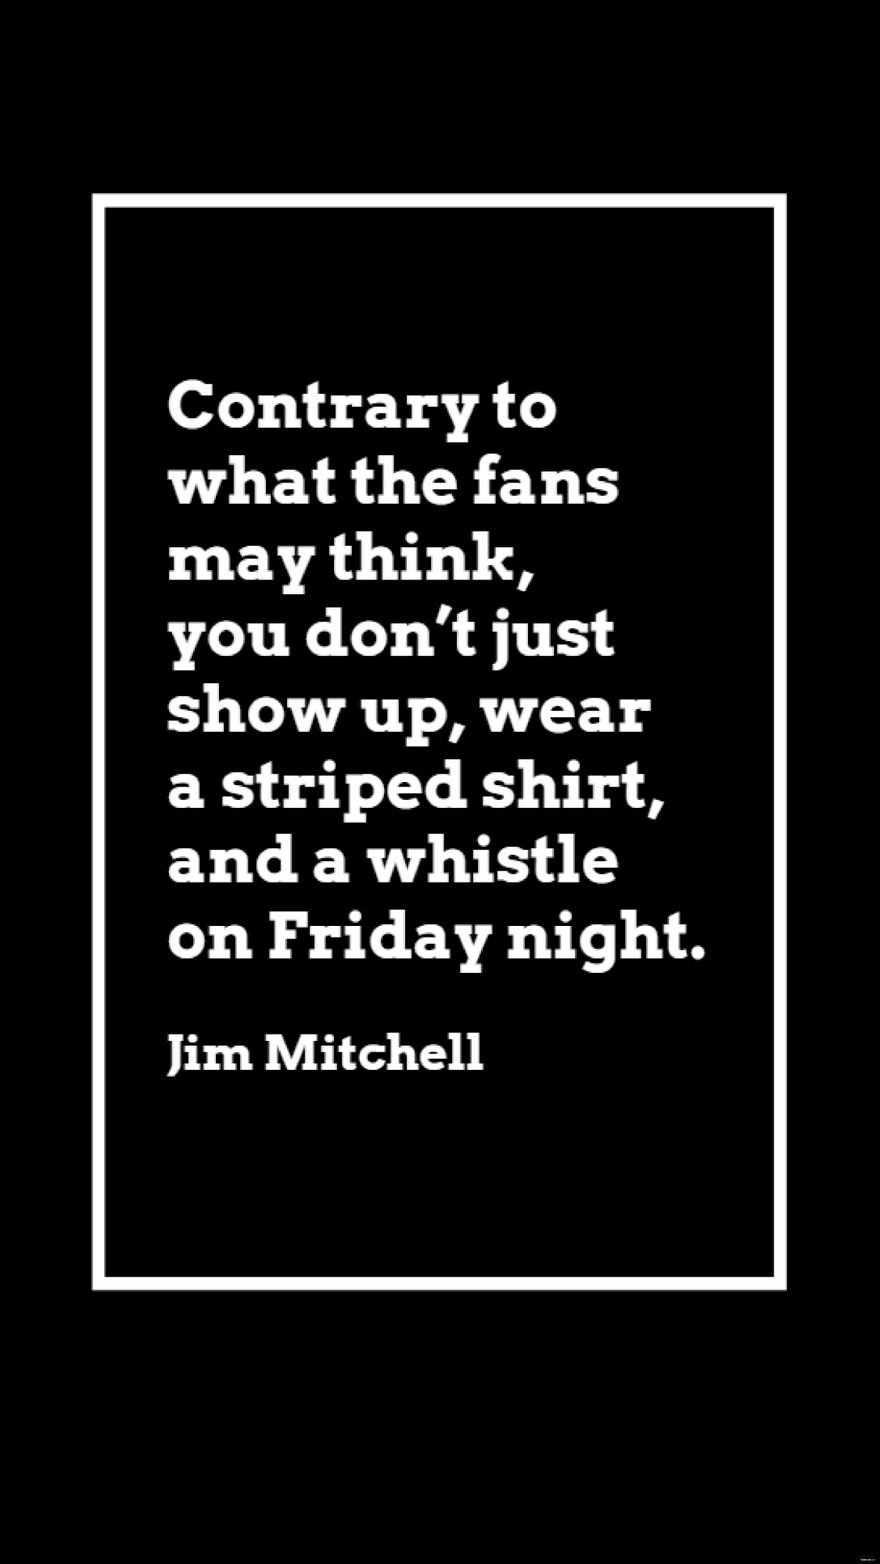 Free Jim Mitchell - Contrary to what the fans may think, you don’t just show up, wear a striped shirt, and a whistle on Friday night.  in JPG